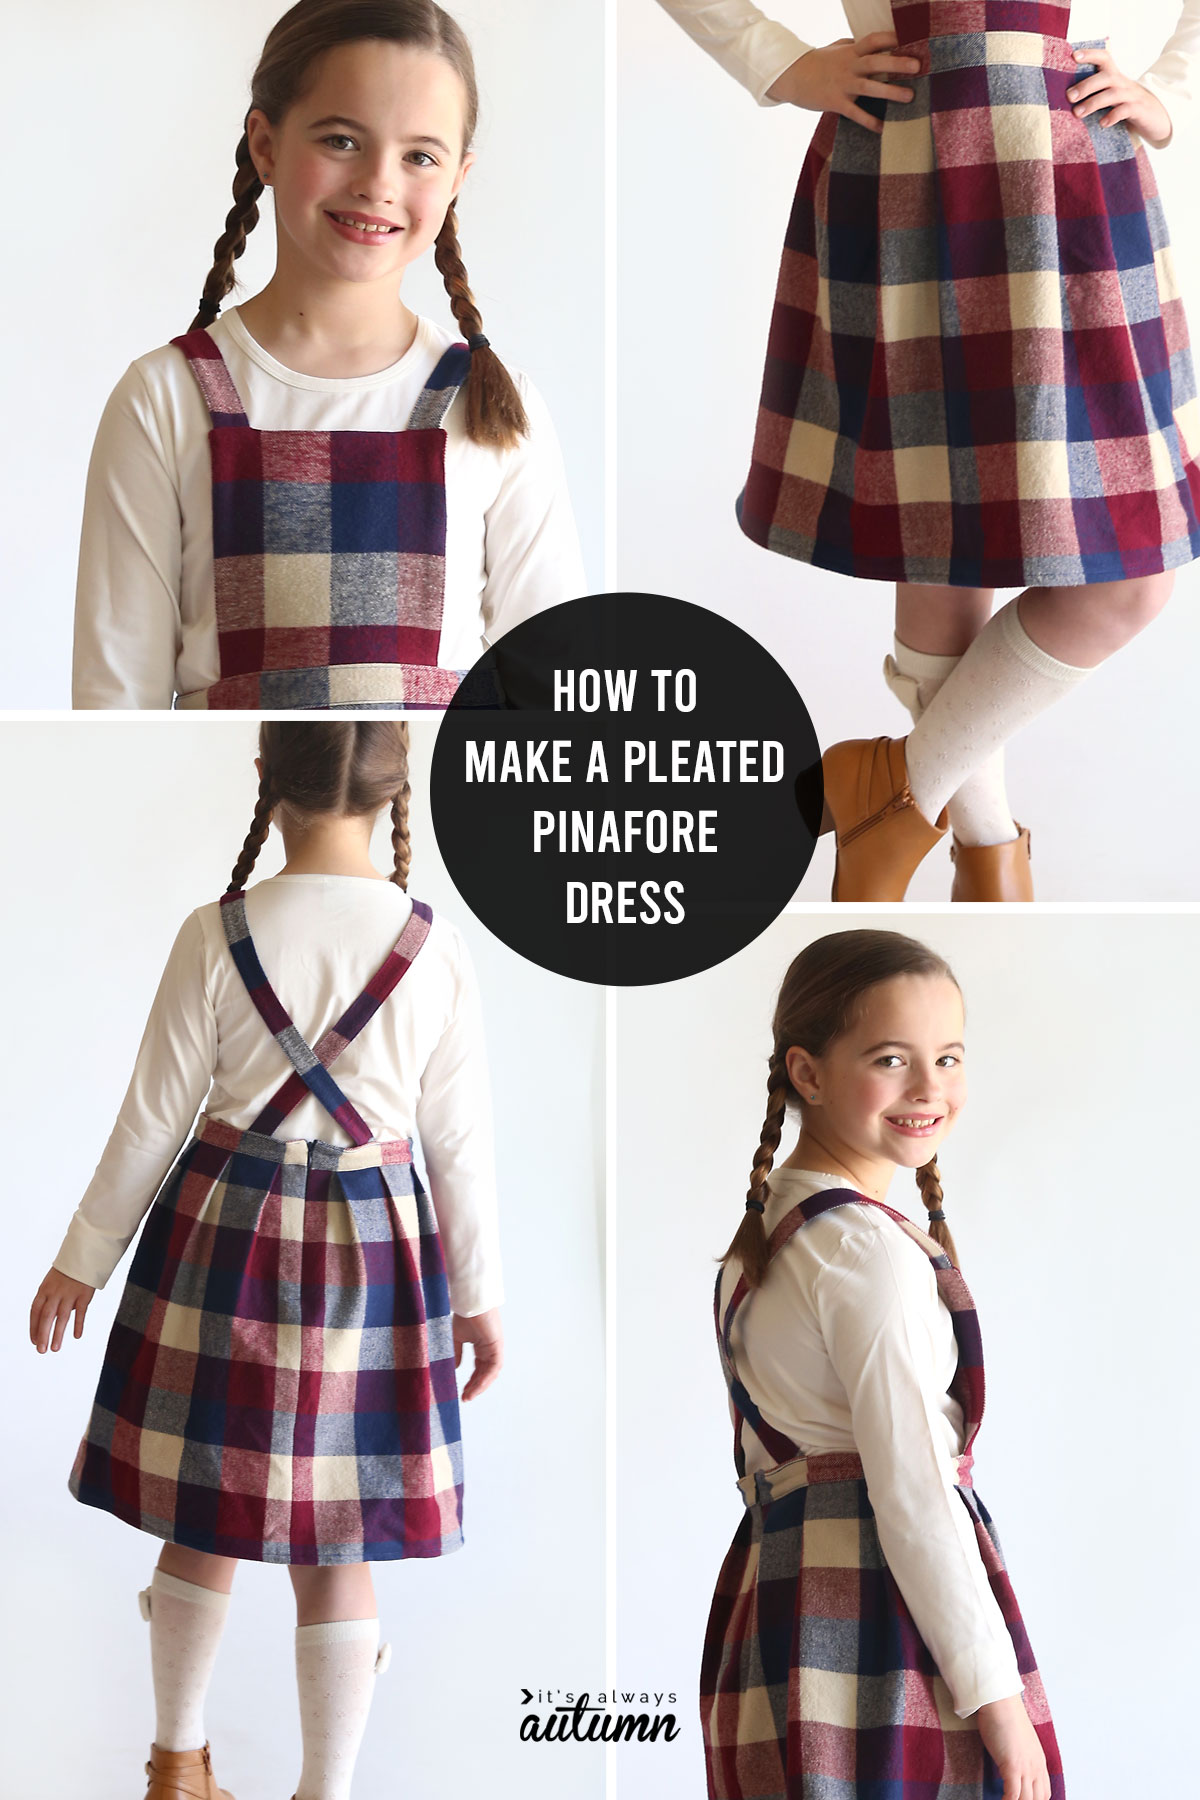 Learn how to create your own pinafore dress pattern and make a pinafore dress in any size!